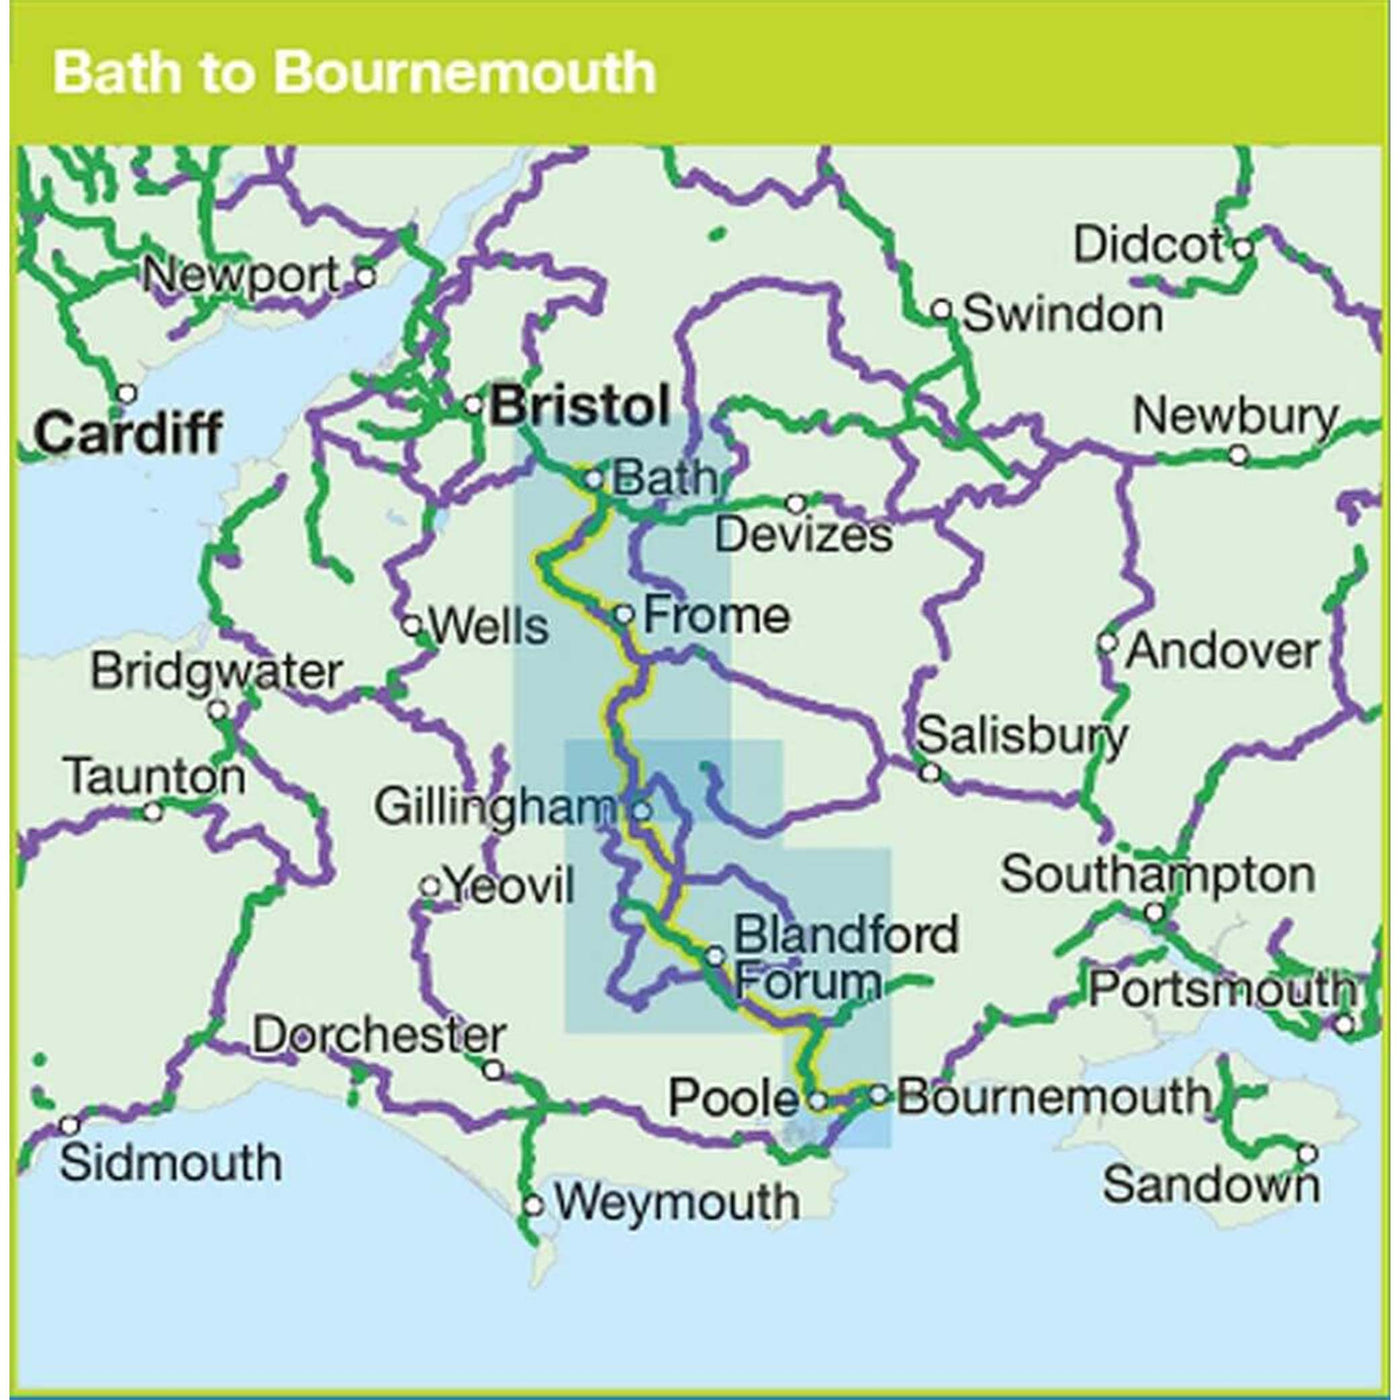 Bath to Bournemouth cycle route coverage